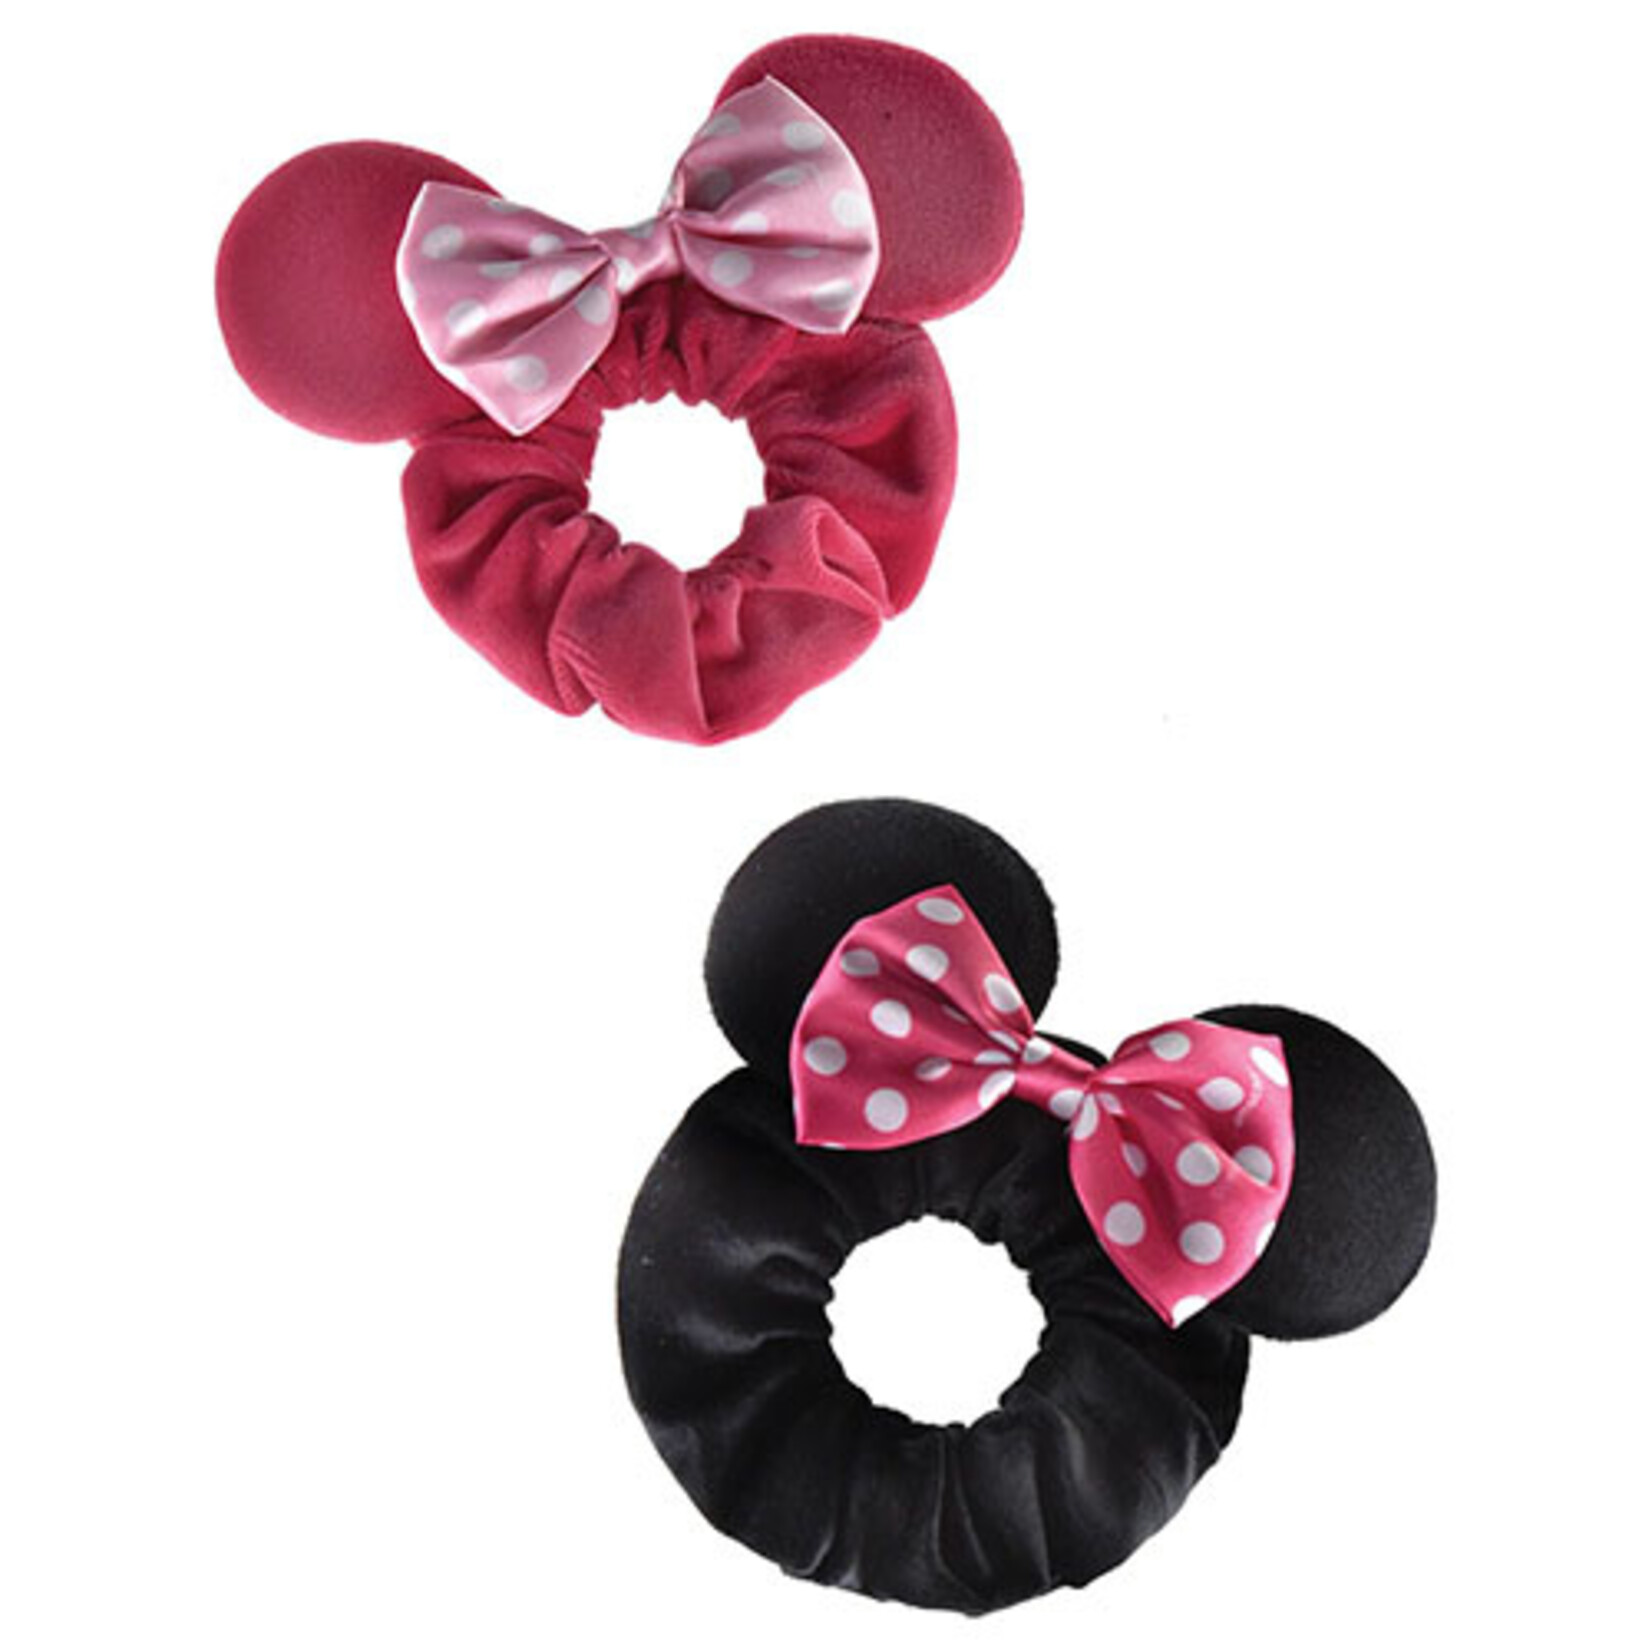 Amscan Minnie Mouse Forever Hair Accessories - 4ct.